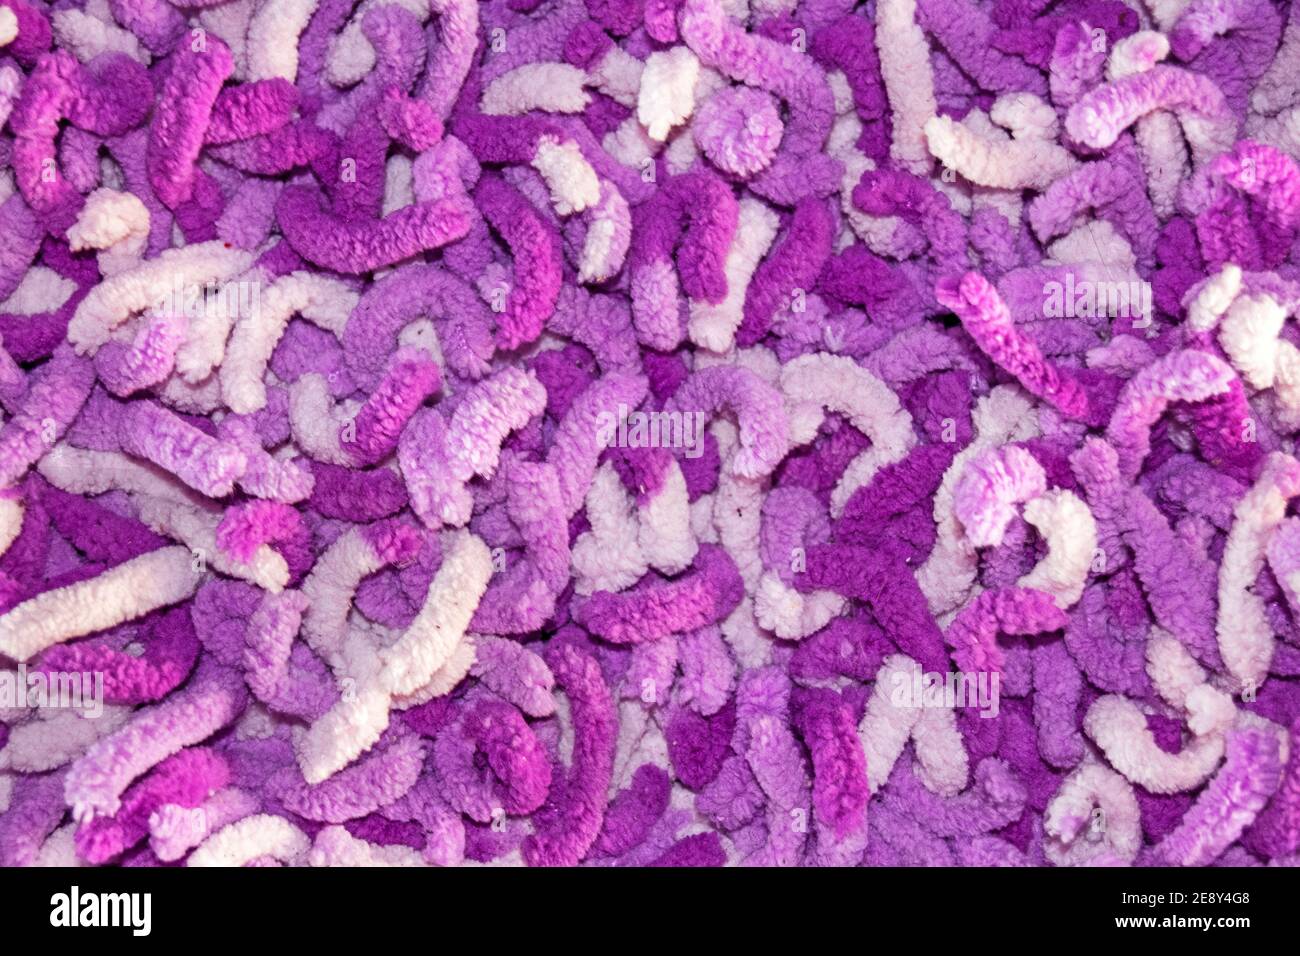 Texture of long hair carpet in purple and pink, fur texture closeup for designers and backgrounds Stock Photo